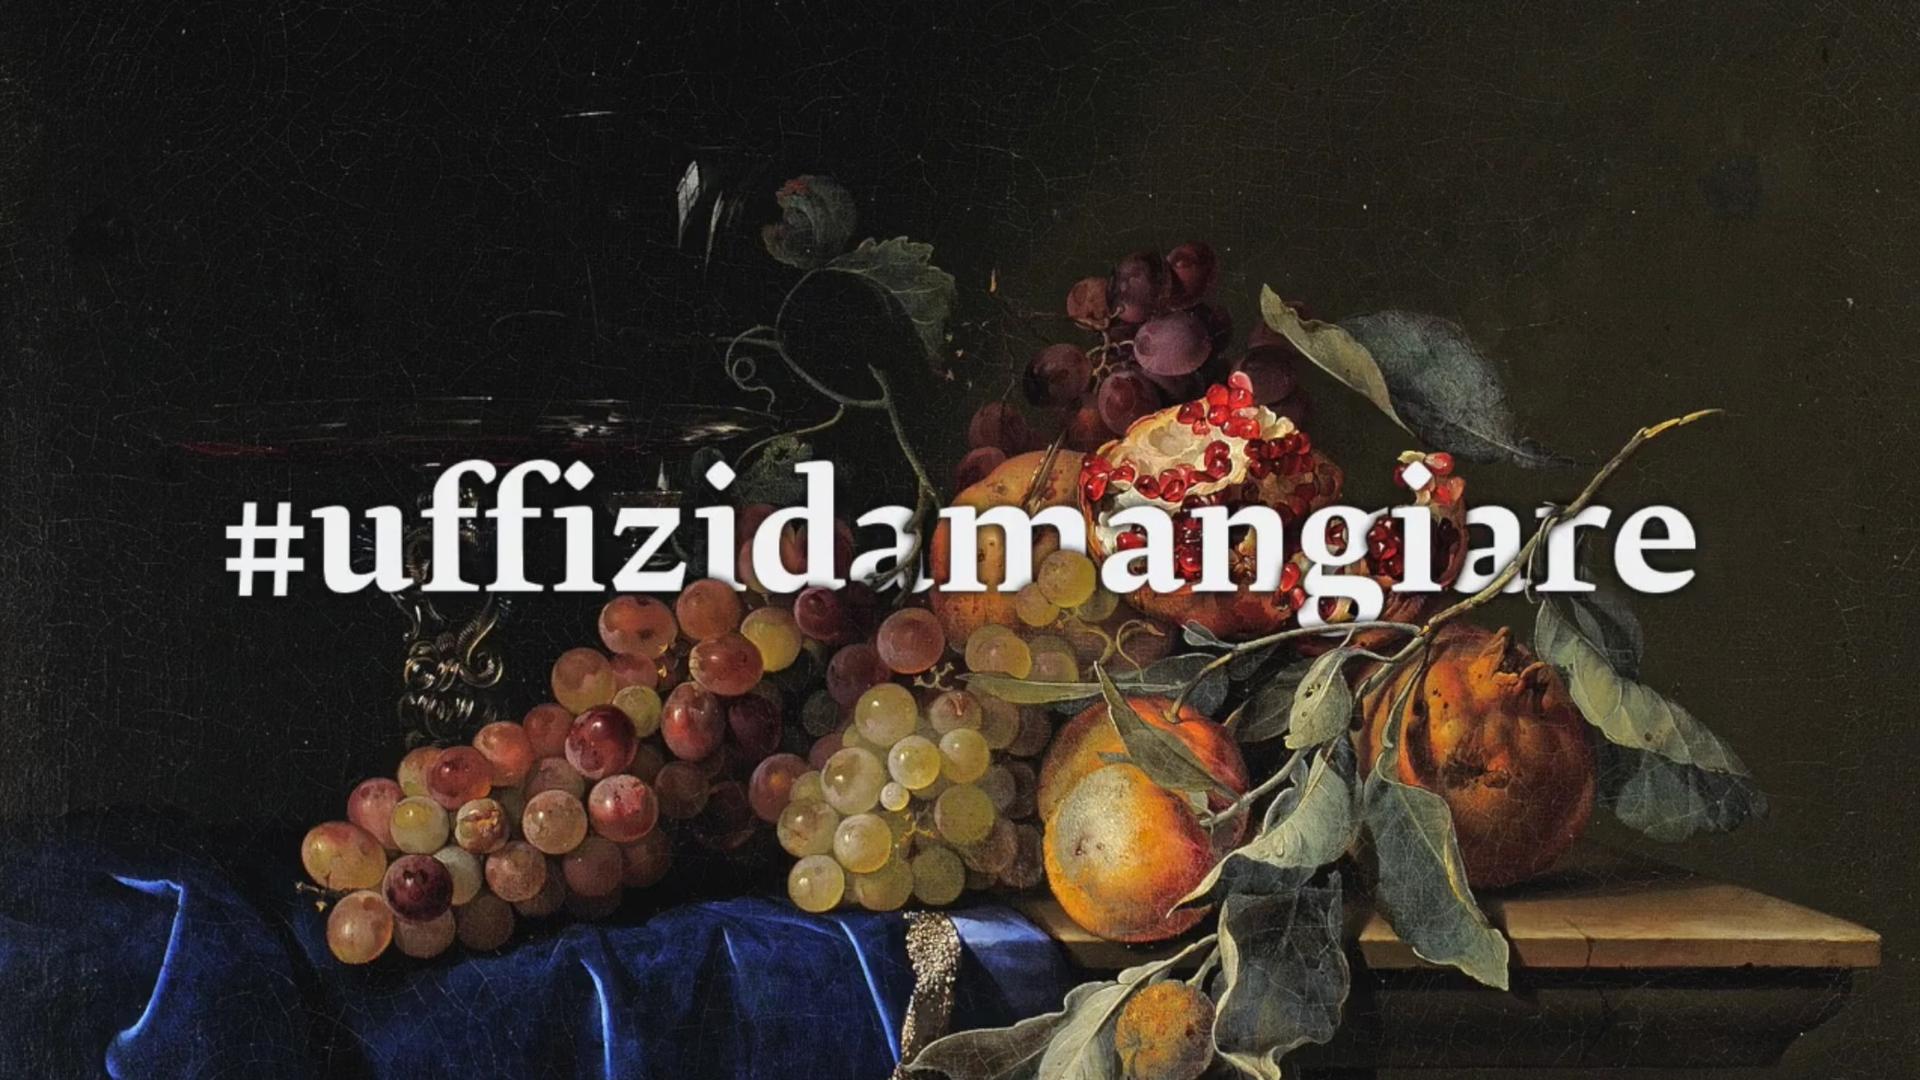 The Italian-language videos "Uffizi da mangiare” (Uffizi on a dish), which will be posted on Facebook every Sunday, see Florentine chefs present new recipes inspired by artworks from the Uffizi’s collection Courtesy of the Uffizi Galleries